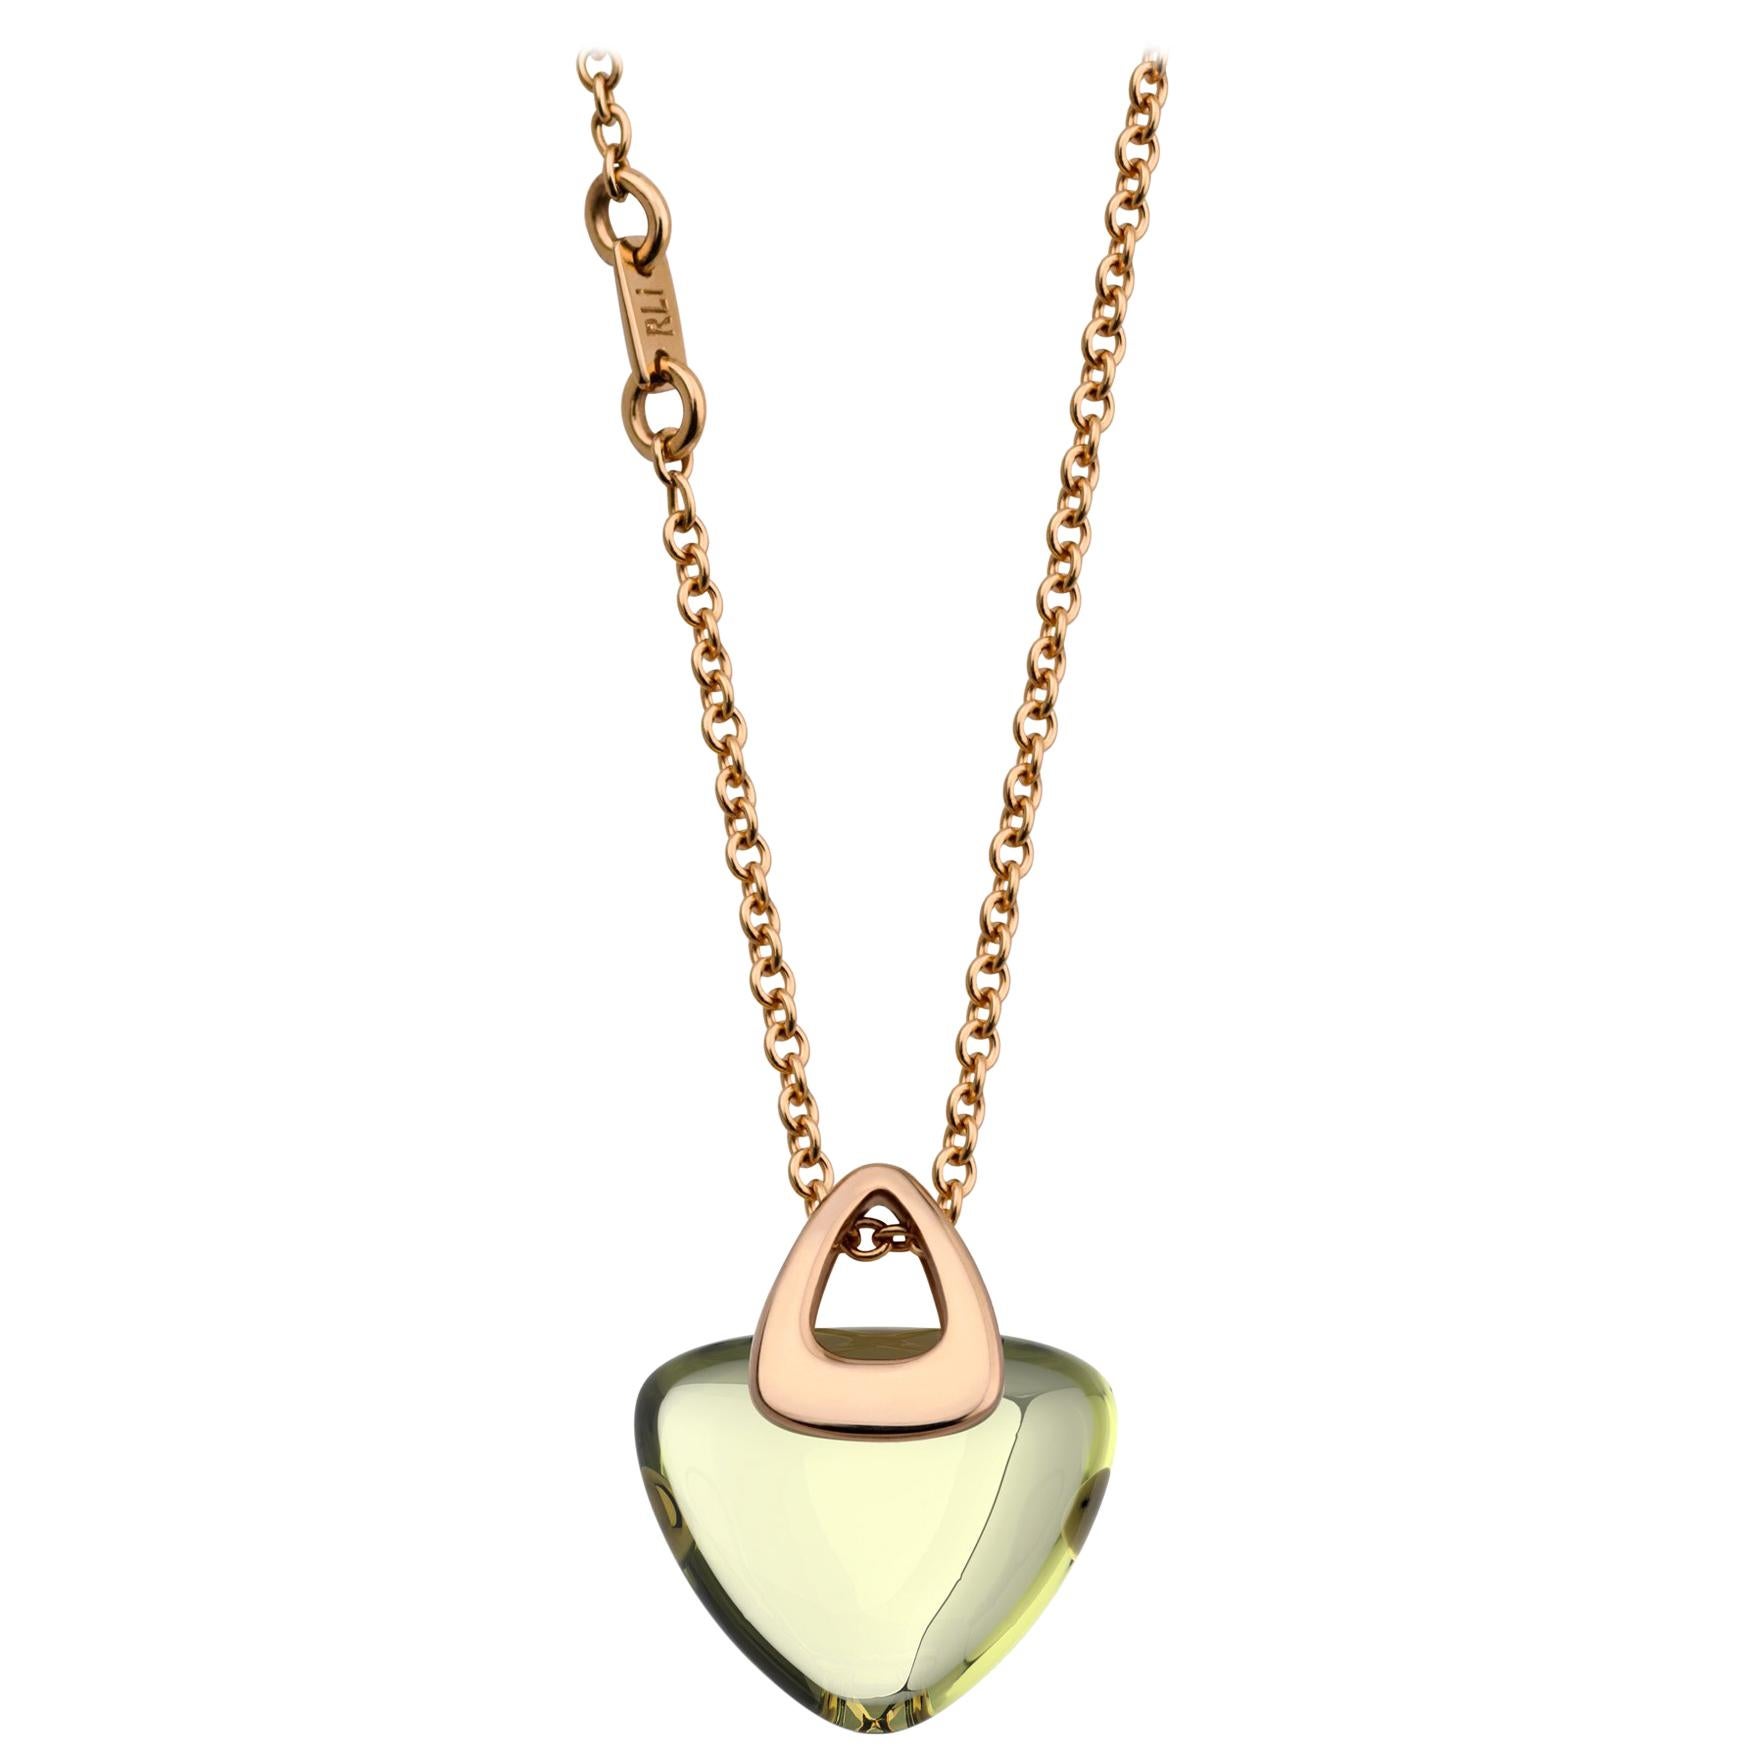 Modern Geometrical Triangle Heart 18k Gold Luck Rock Necklace with Lemon Citrine